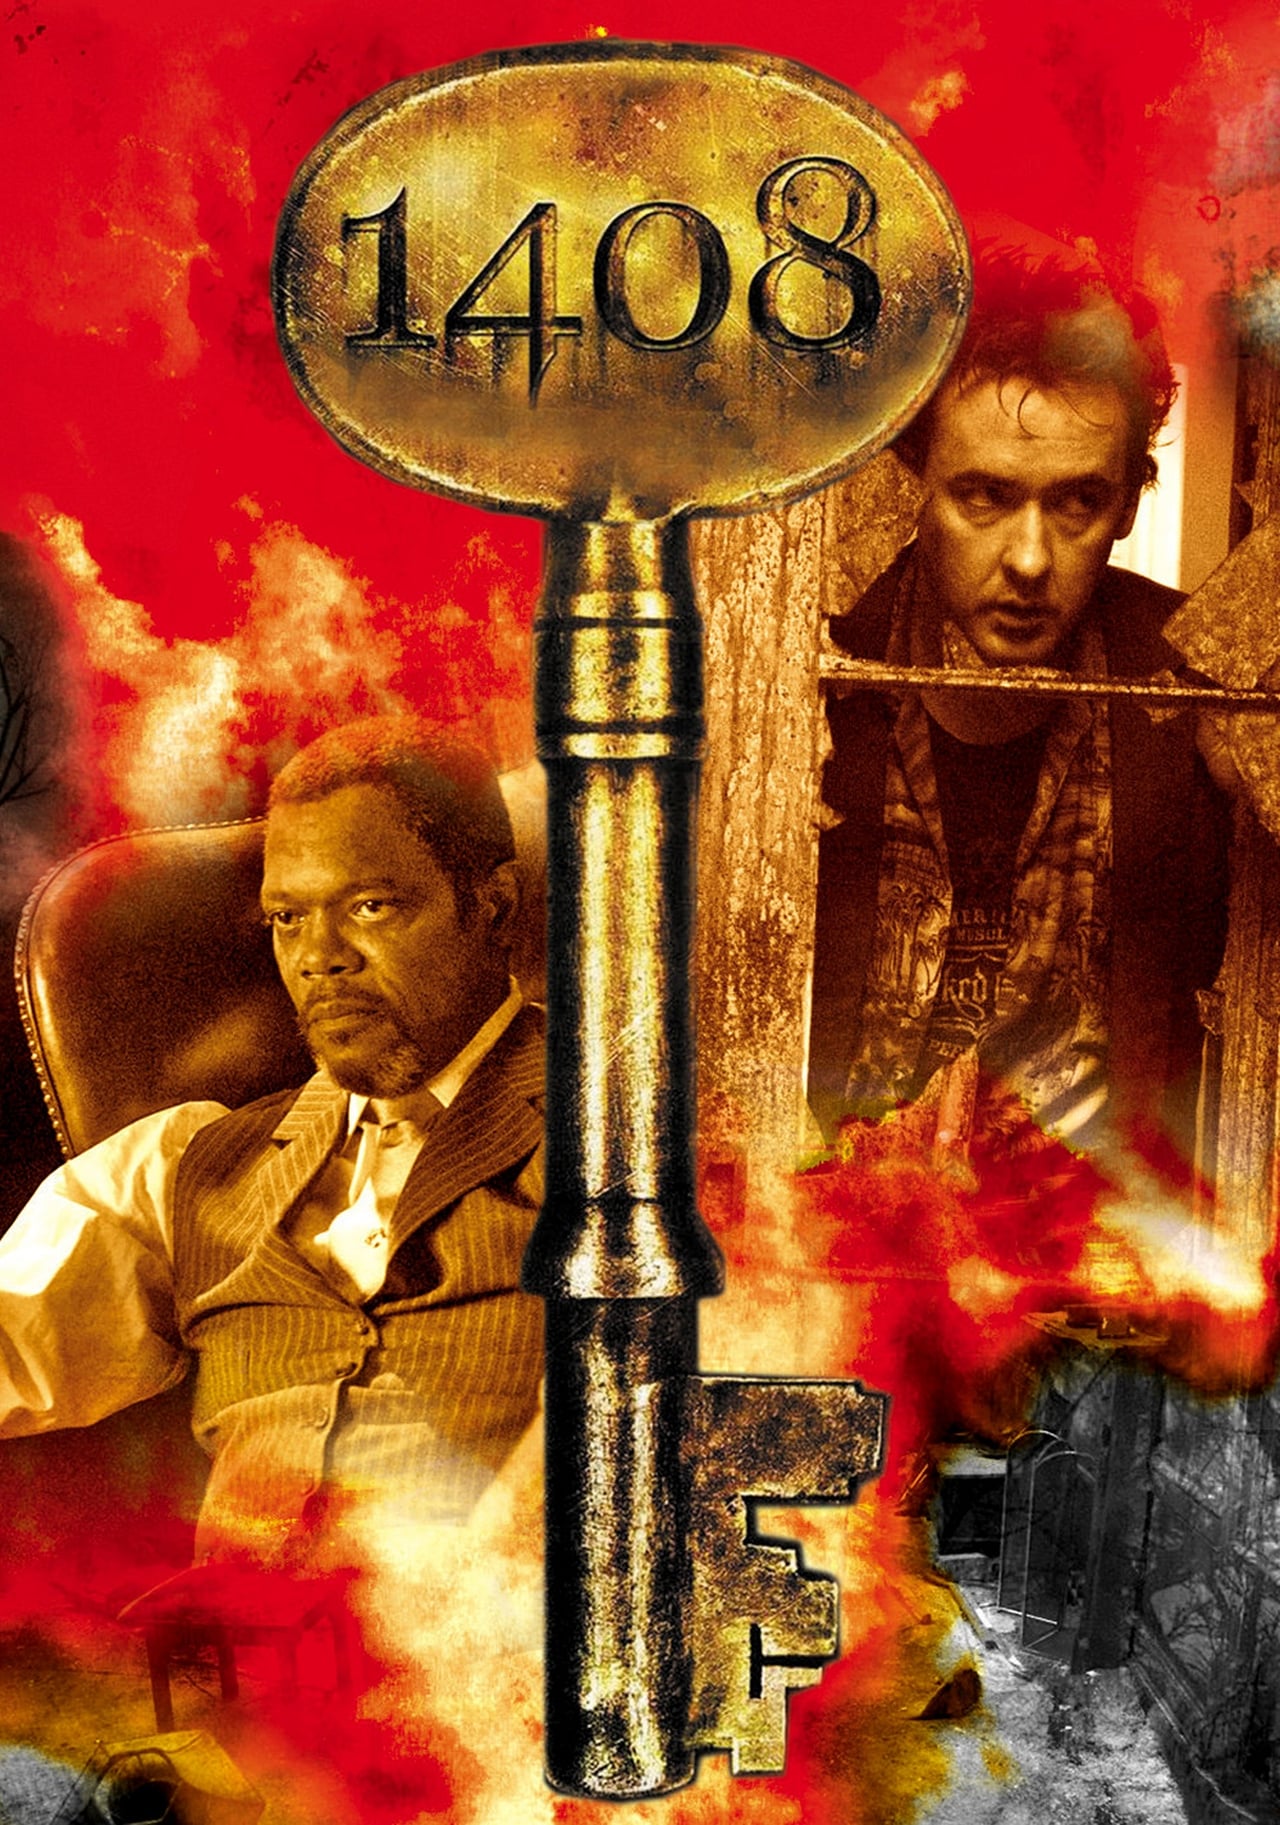 1408 horror movie review